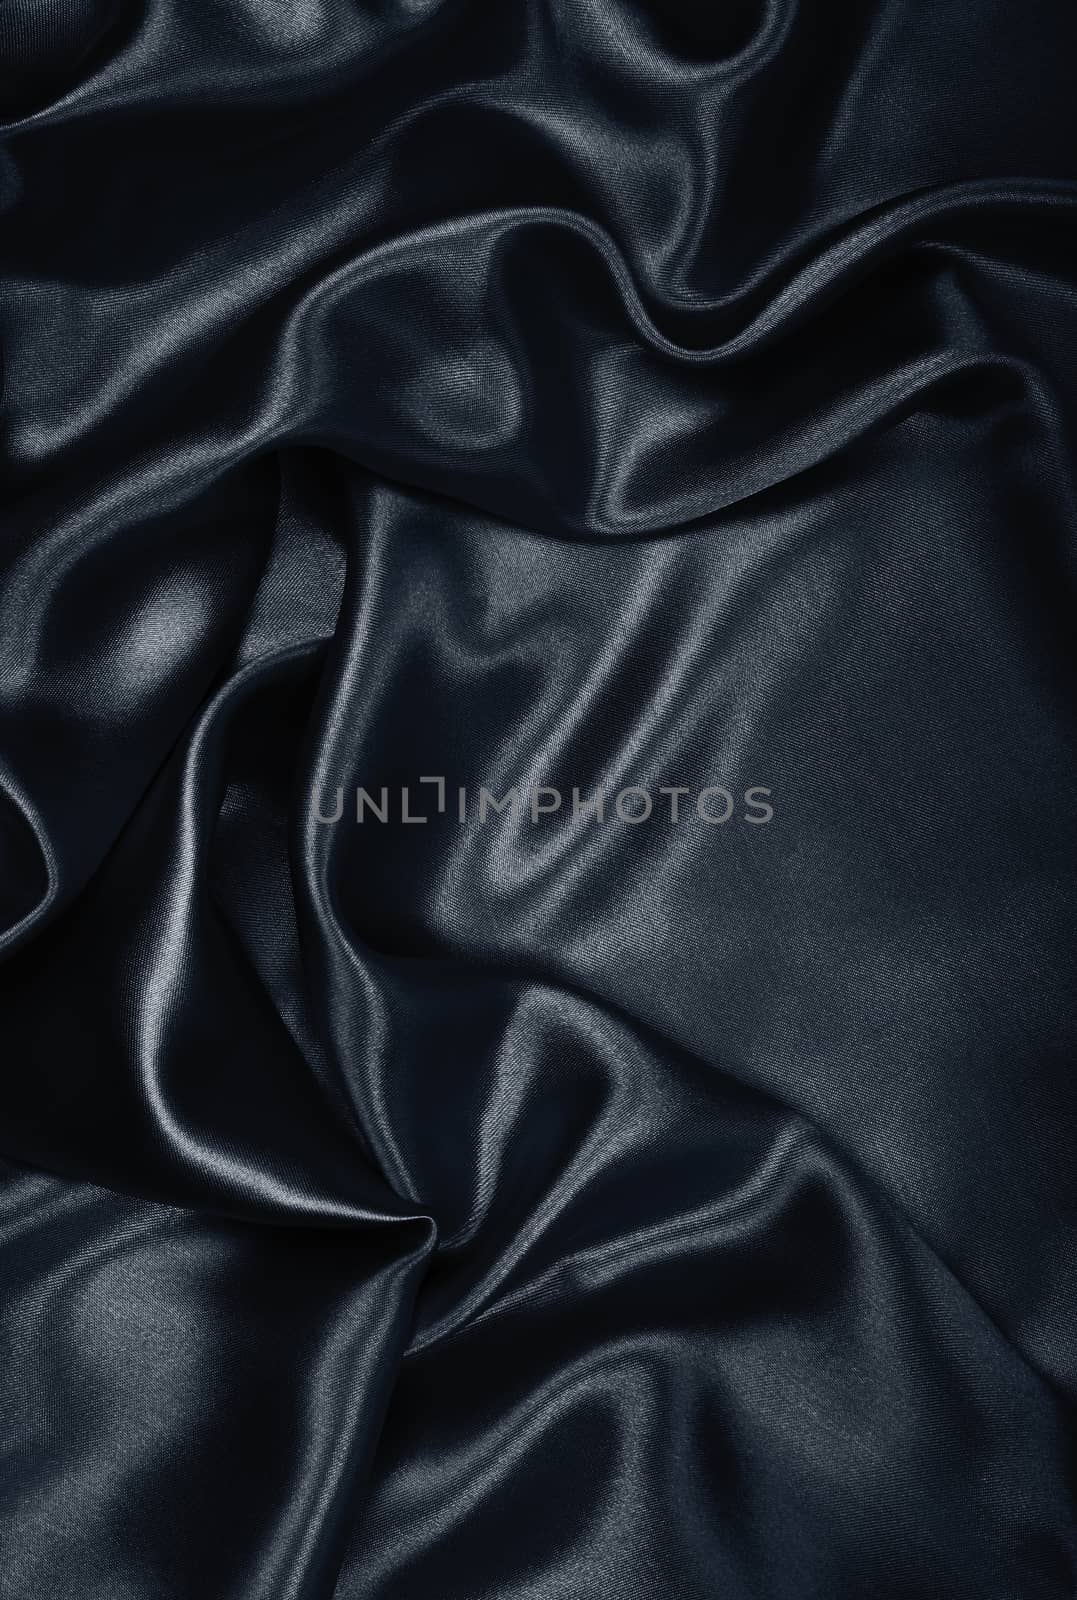 Smooth elegant black silk or satin can use as background 